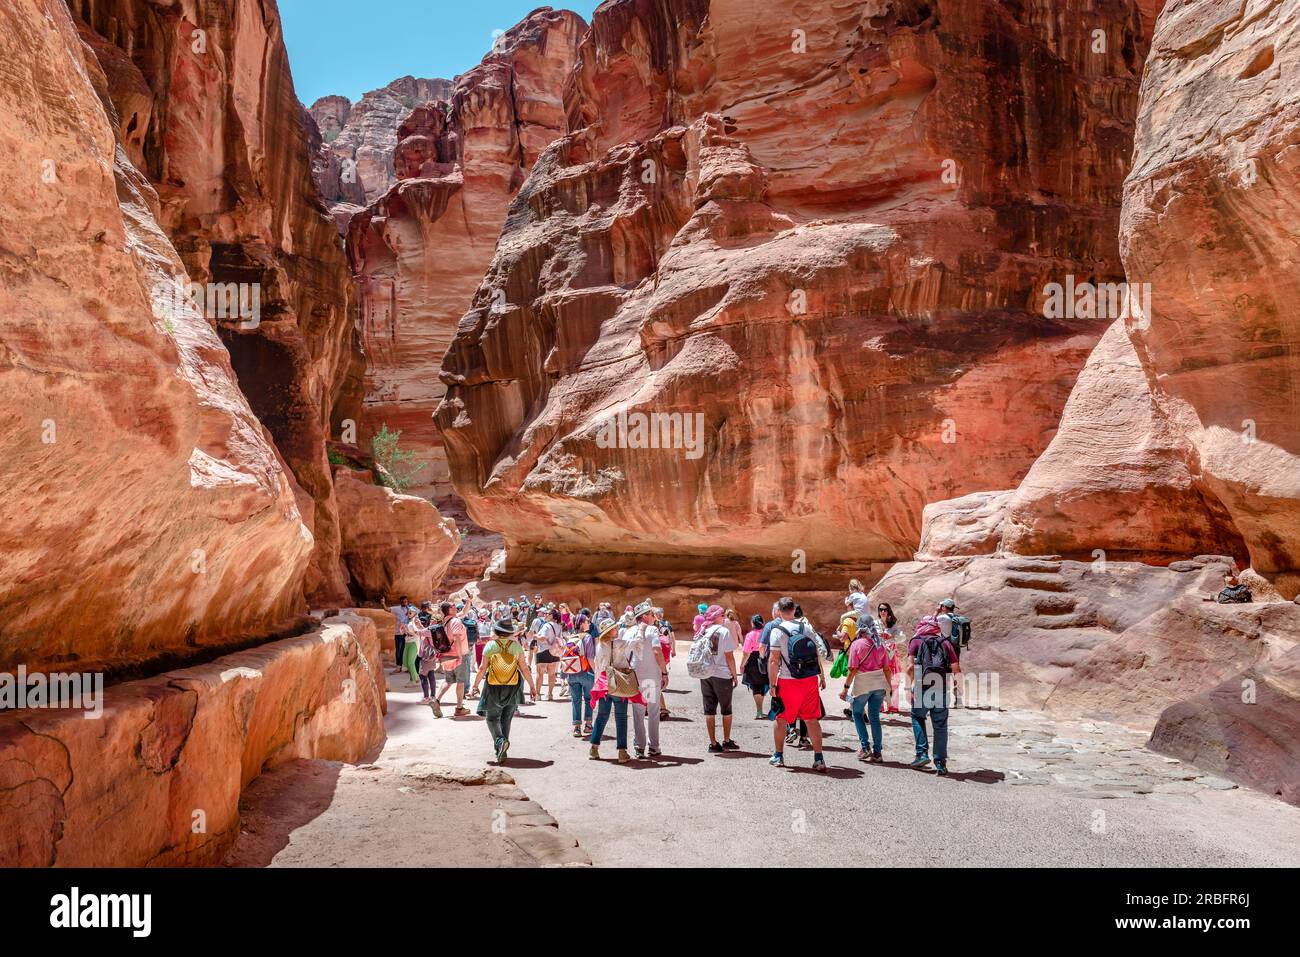 Tourists walk in the Siq, the main entrance to the ancient Nabatean city of Petra, Jordan. Siq is a dim, narrow gorge that ends to the Treasury. Stock Photo